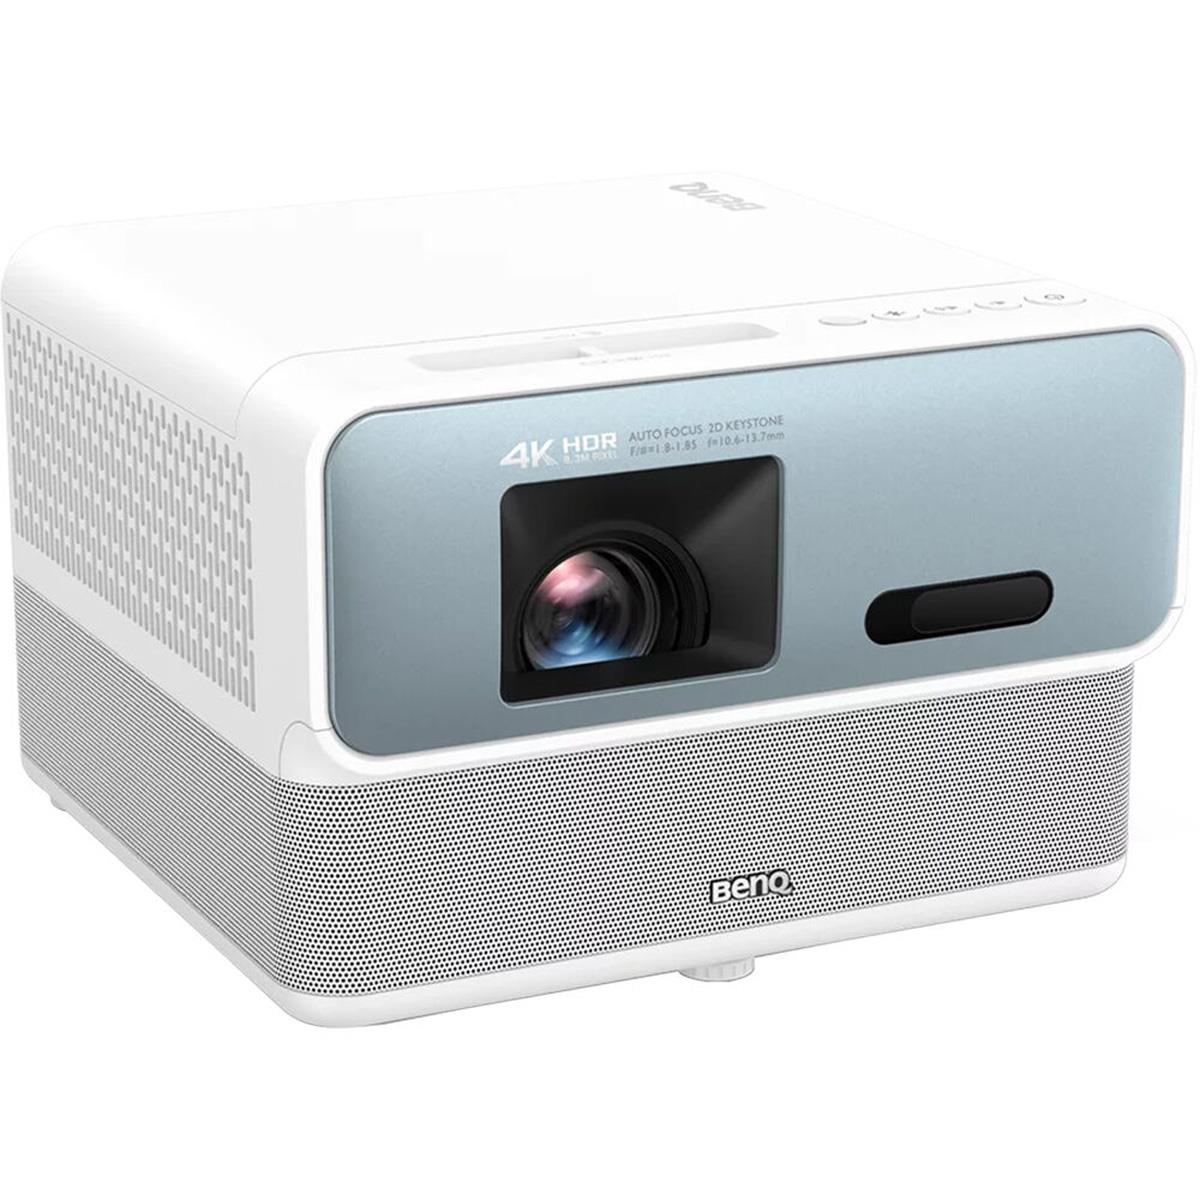 BenQ GP500 4K HDR LED Smart Home Theater Projector $999 + free s/h